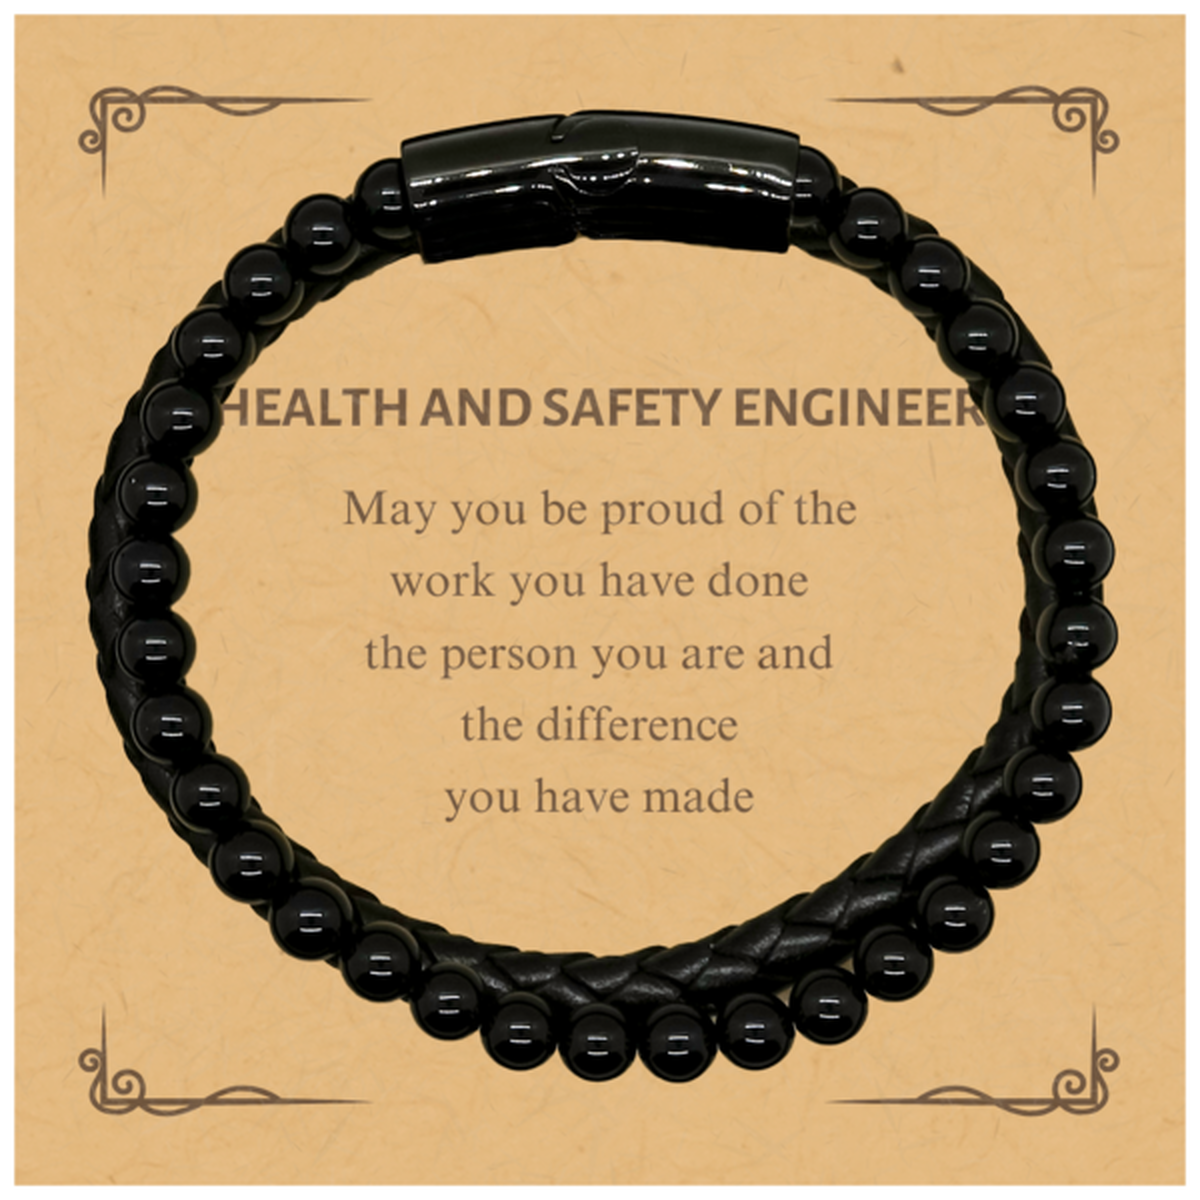 Health and Safety Engineer May you be proud of the work you have done, Retirement Health and Safety Engineer Stone Leather Bracelets for Colleague Appreciation Gifts Amazing for Health and Safety Engineer